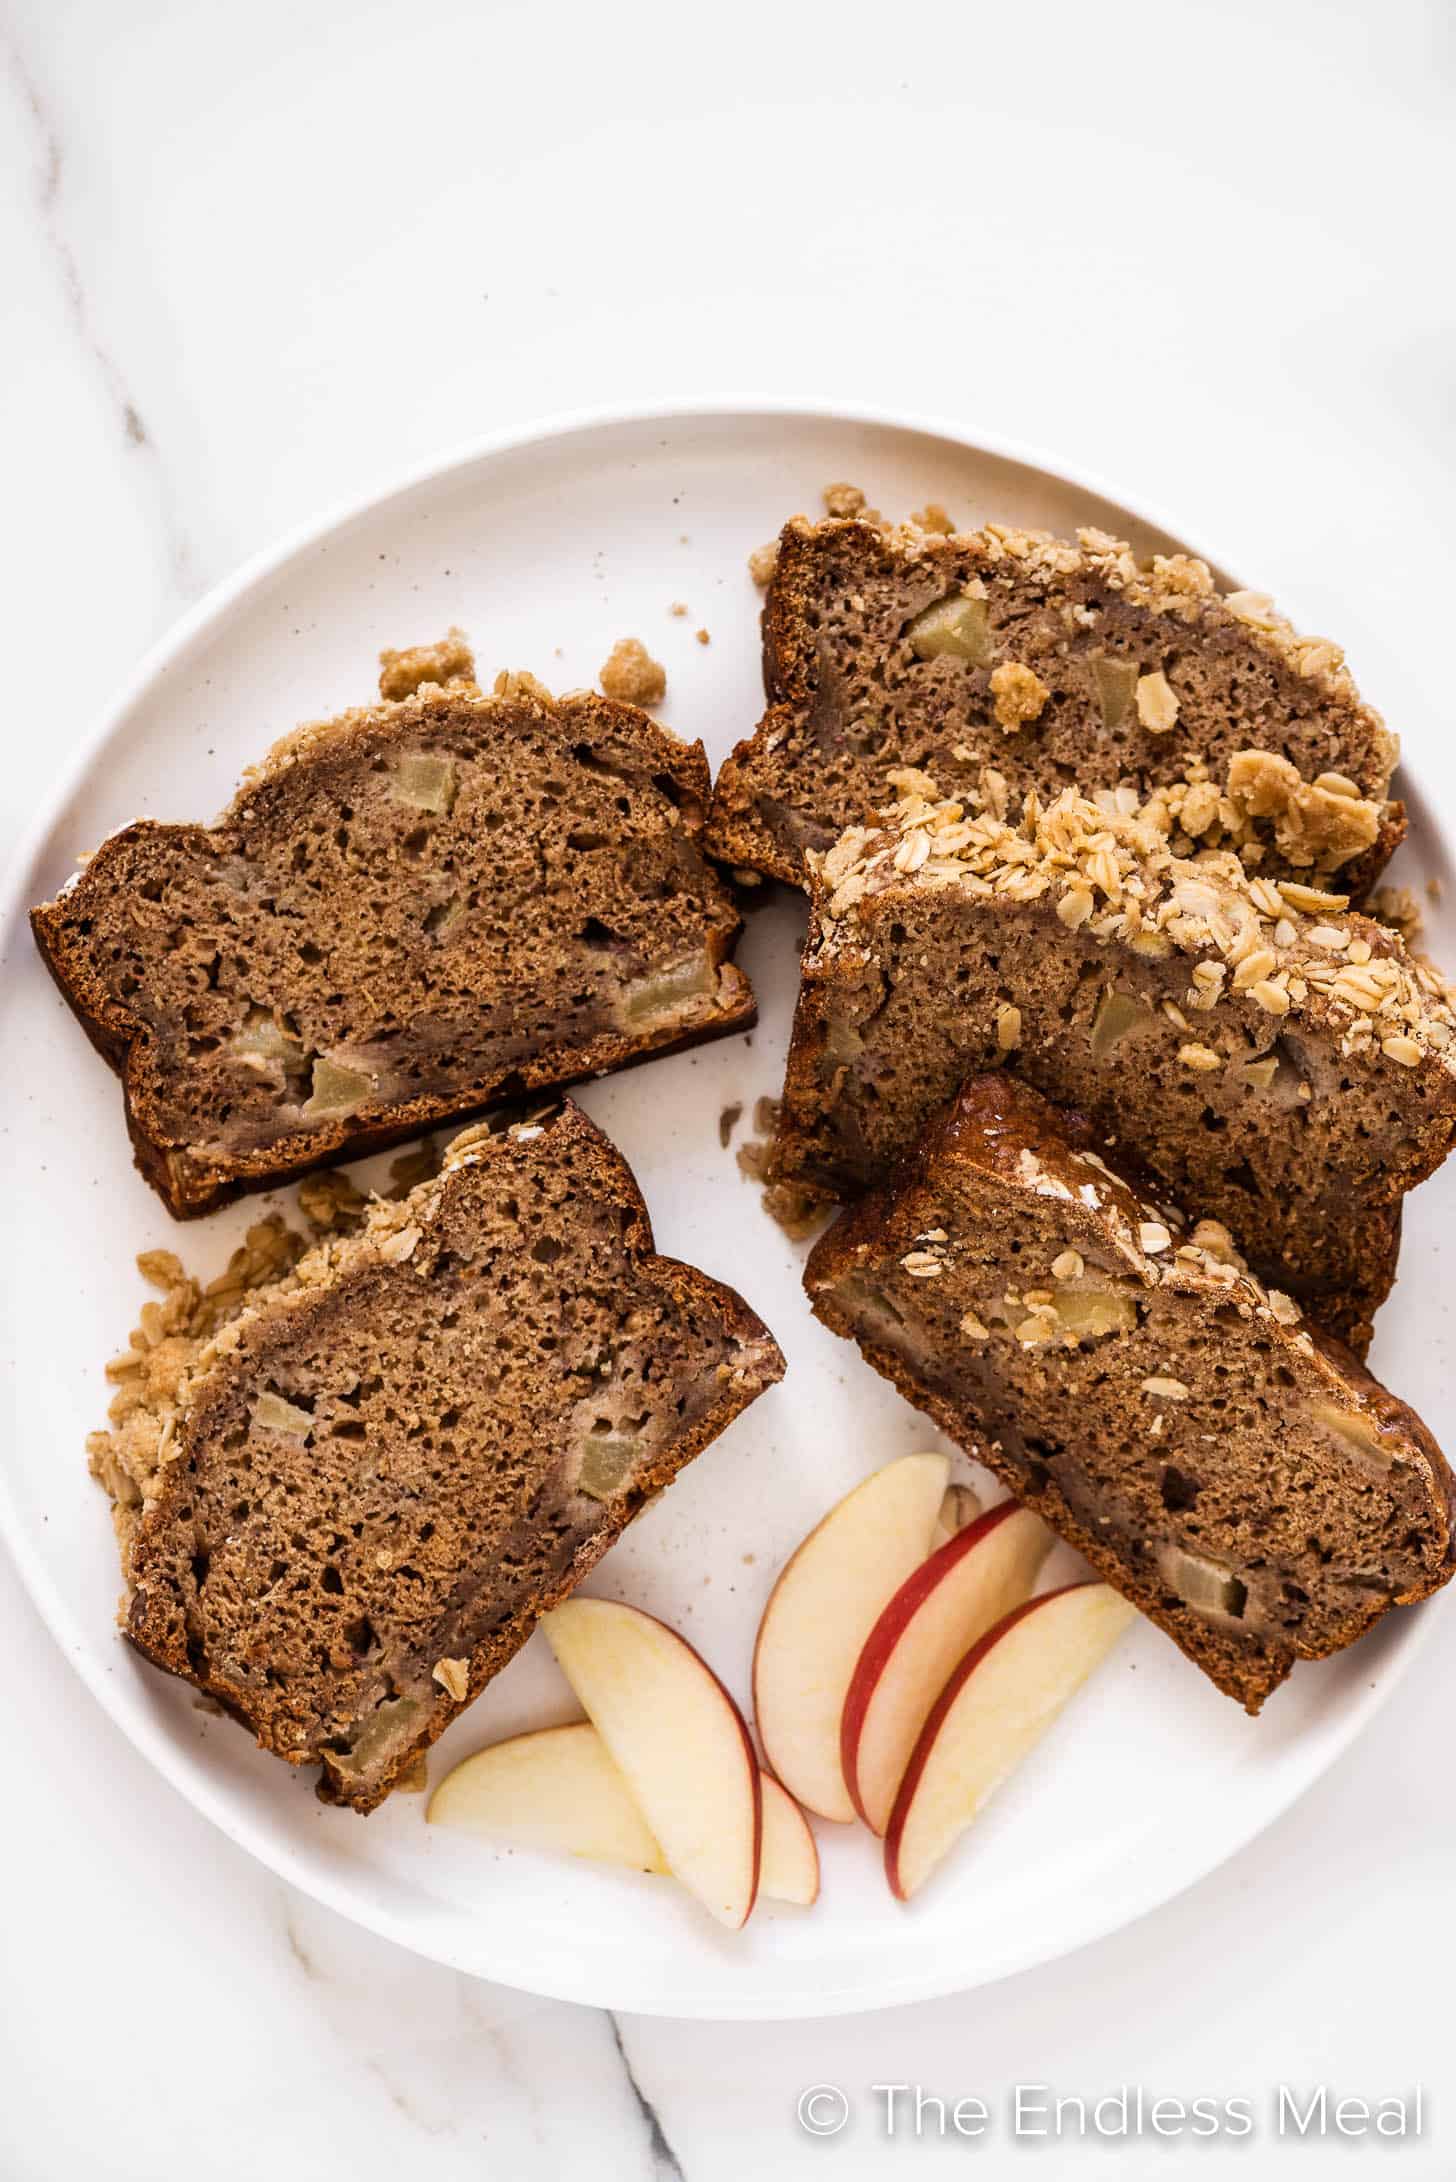 Apple Banana Bread slices on a plate